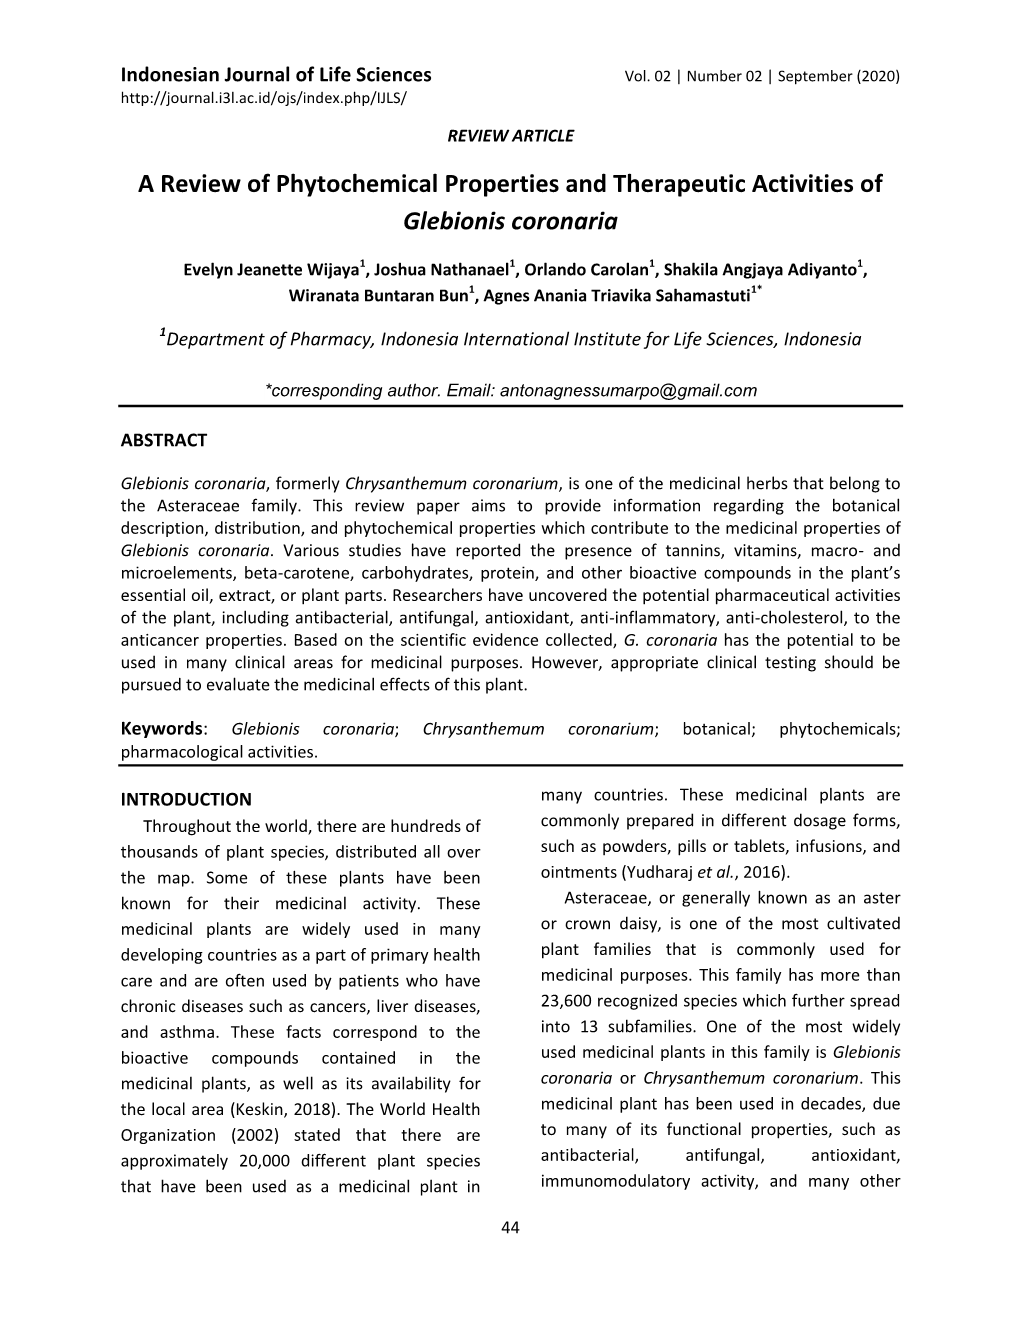 A Review of Phytochemical Properties and Therapeutic Activities of Glebionis Coronaria